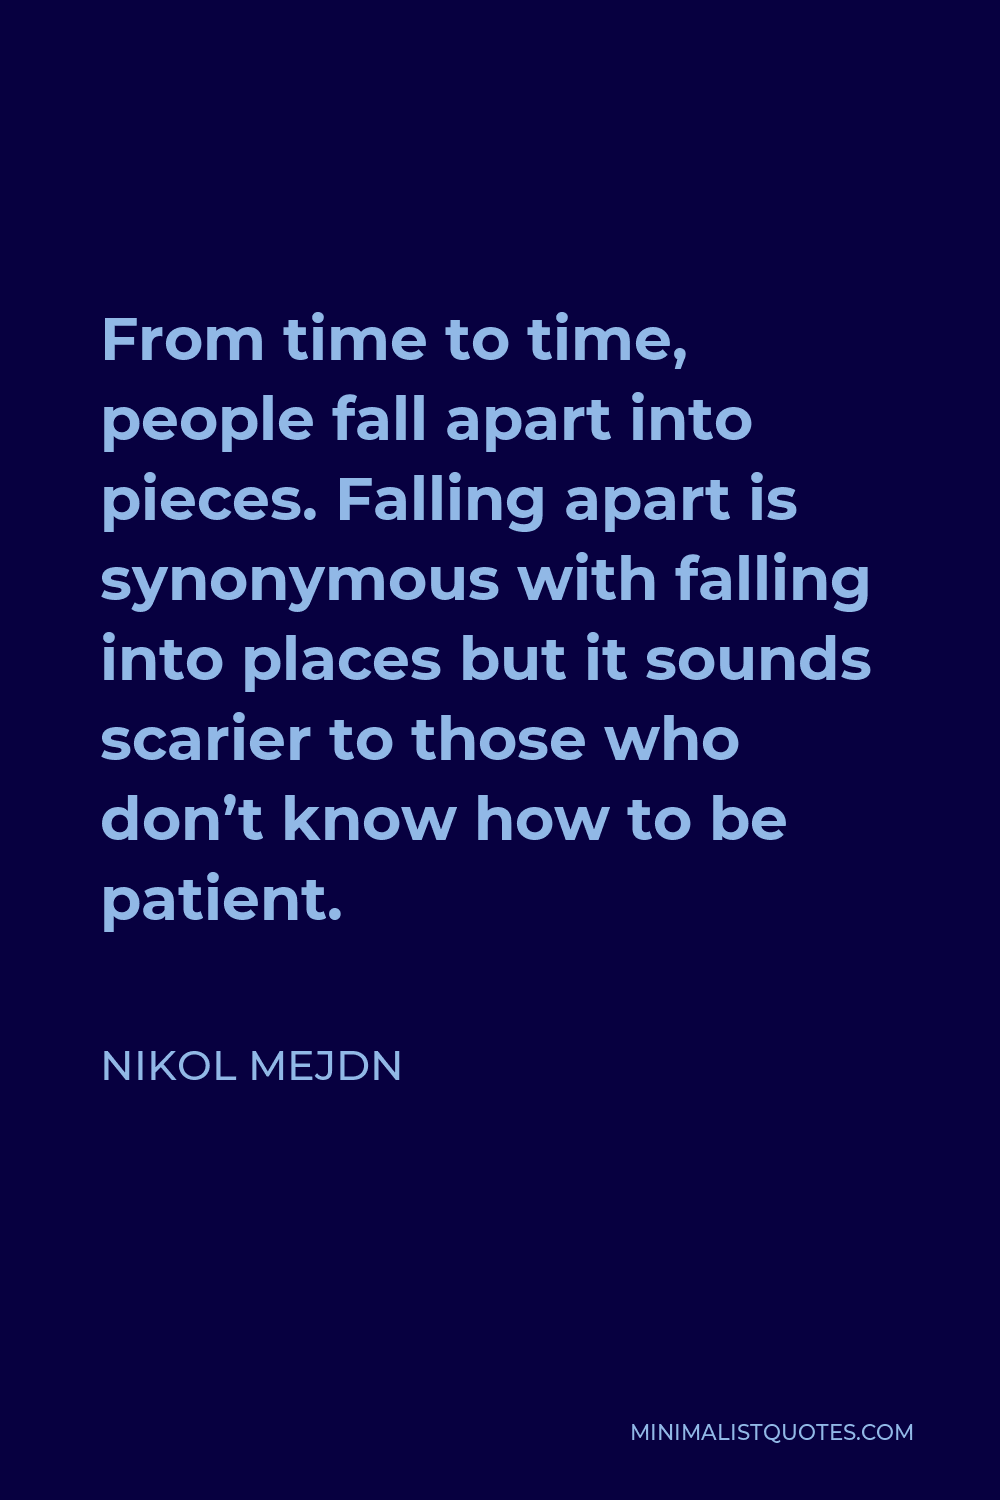 Nikol Mejdn Quote - From time to time, people fall apart into pieces. Falling apart is synonymous with falling into places but it sounds scarier to those who don’t know how to be patient.